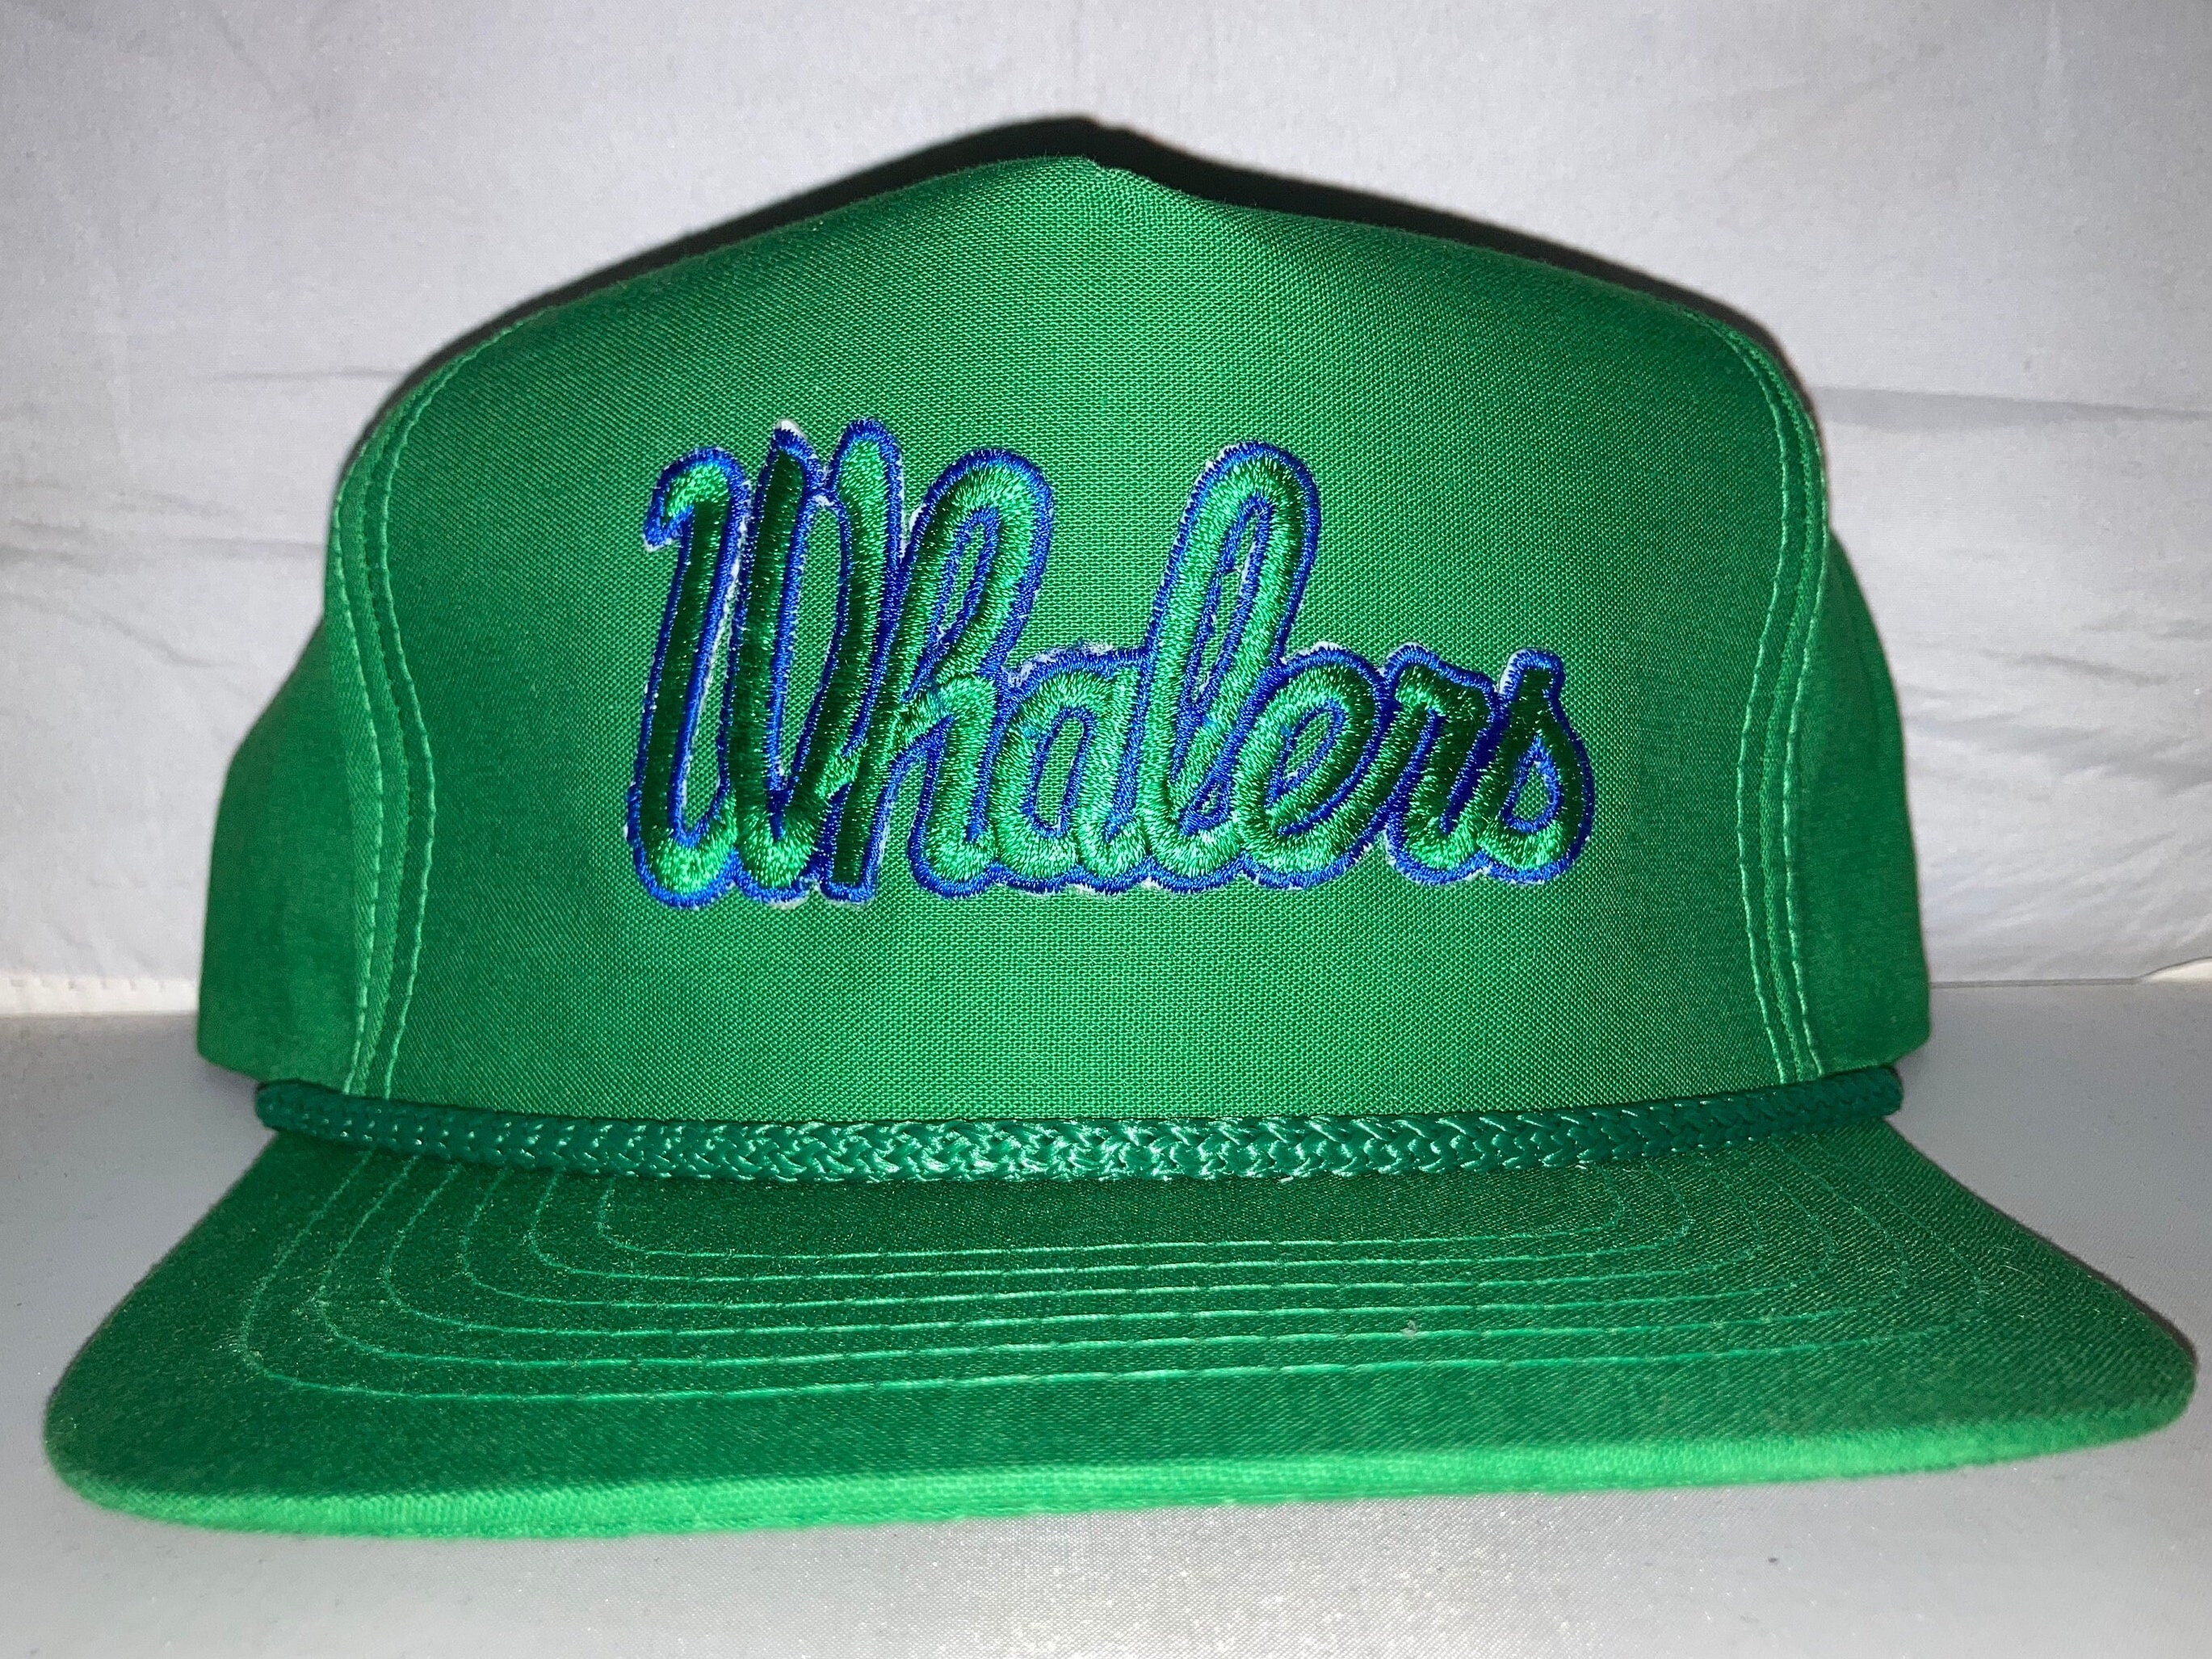 Hartford Whalers 47 Brand Vintage Green Franchise Fitted Hat - XXL